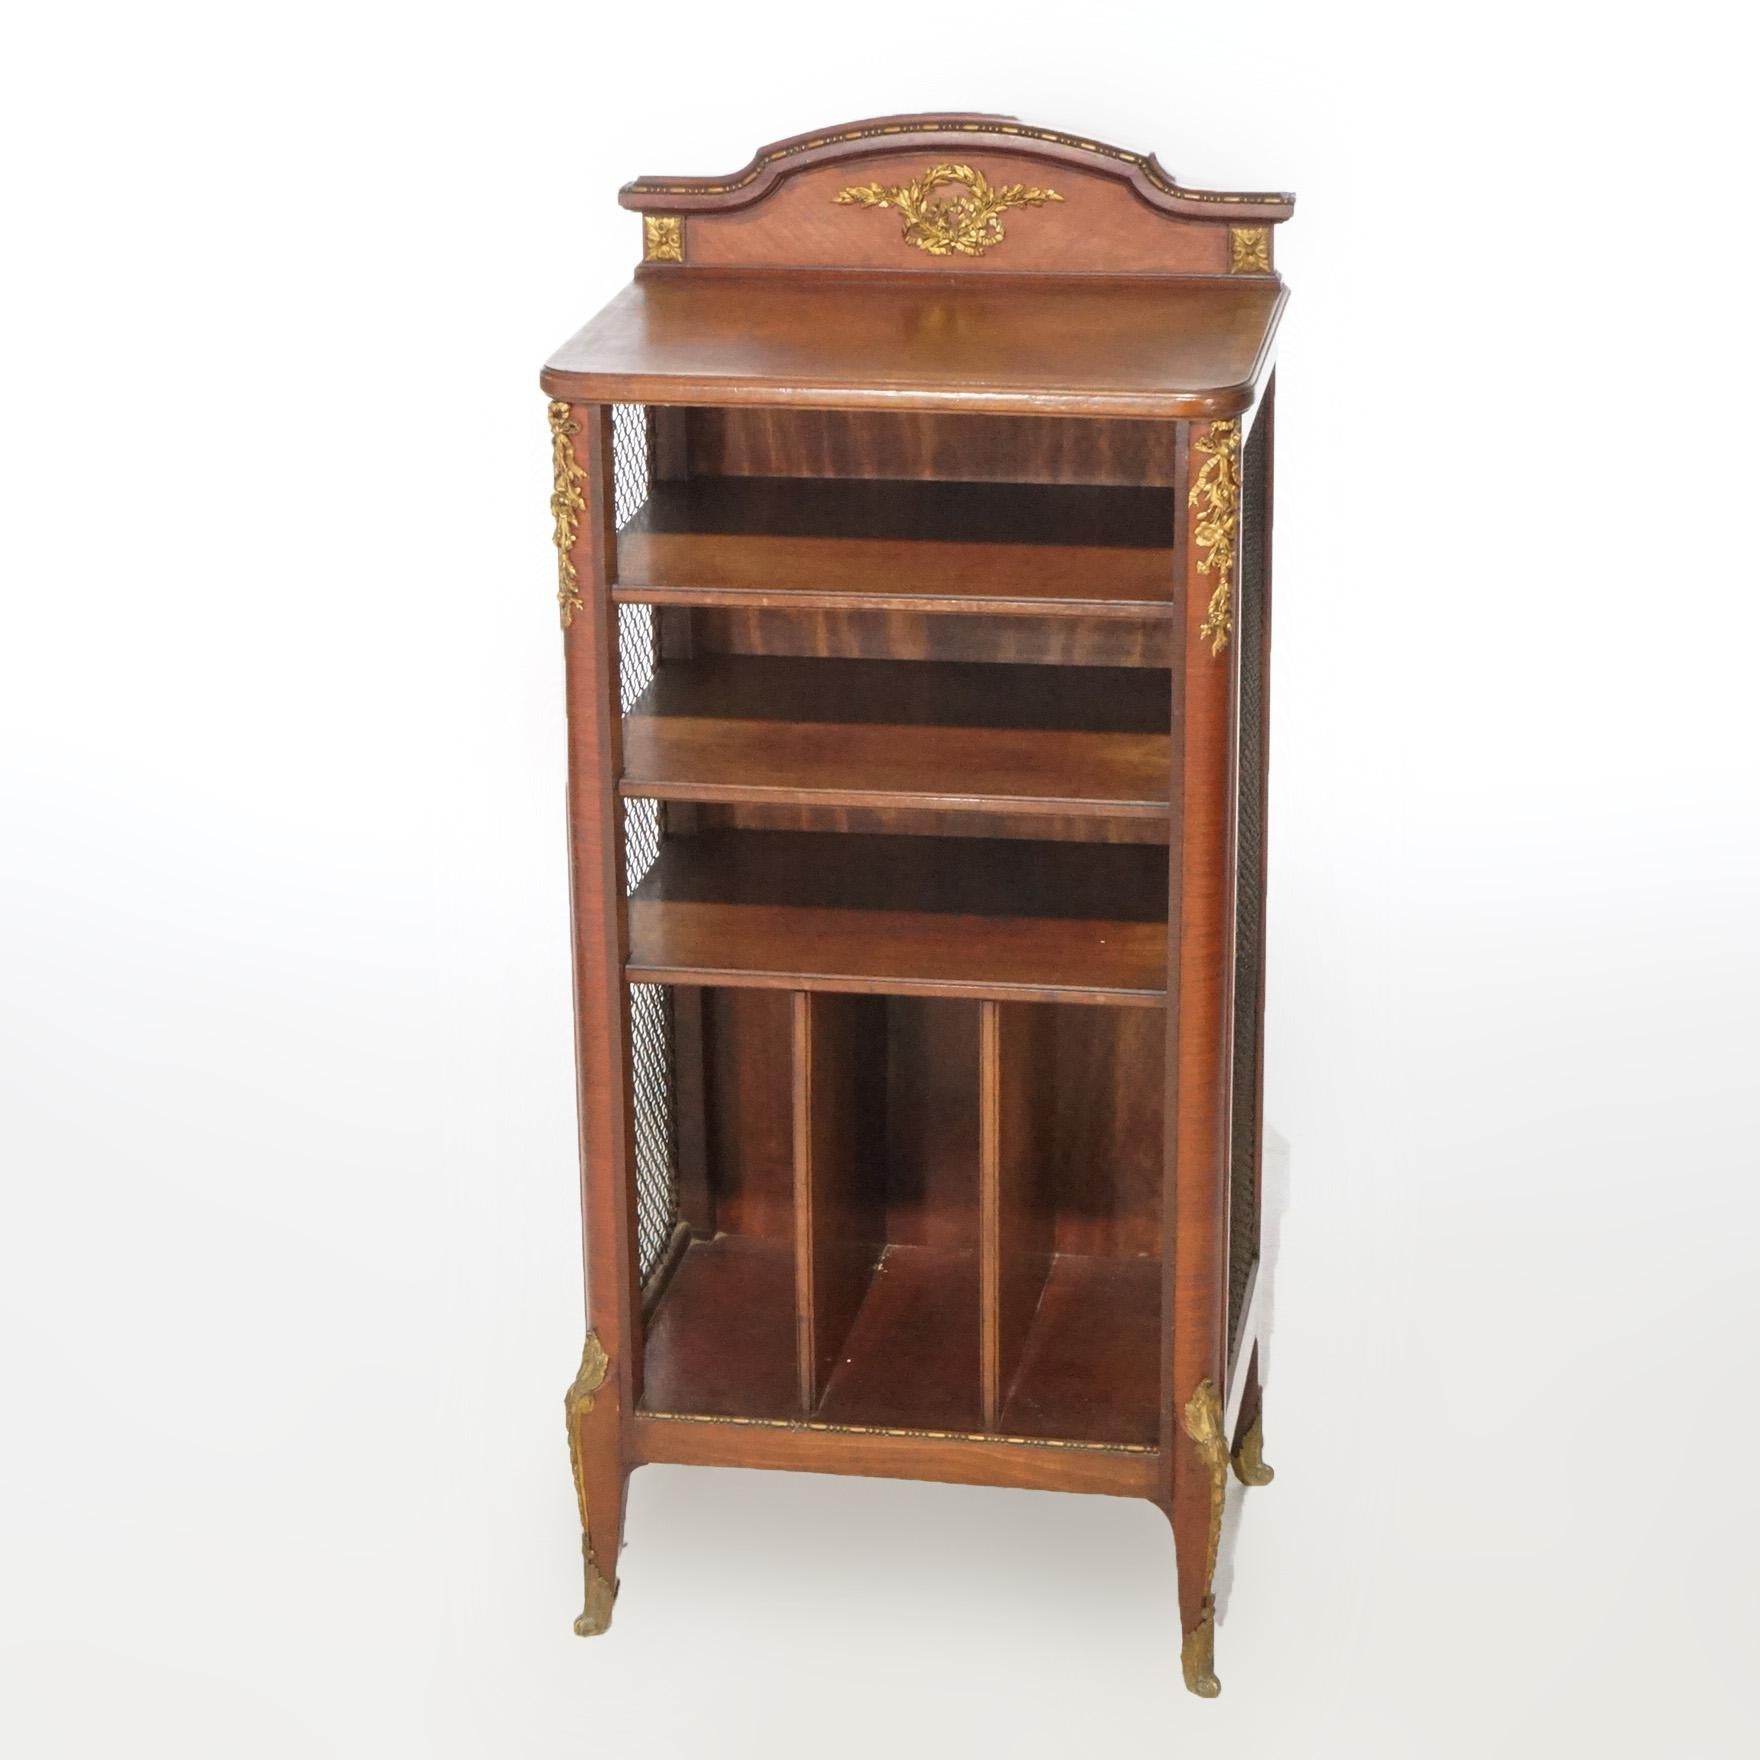 An antique French open music cabinet offers Kingwood and Satinwood construction with mesh sides, foliate cast ormolu and raised on cabriole legs, circa 1920

Measures - 45